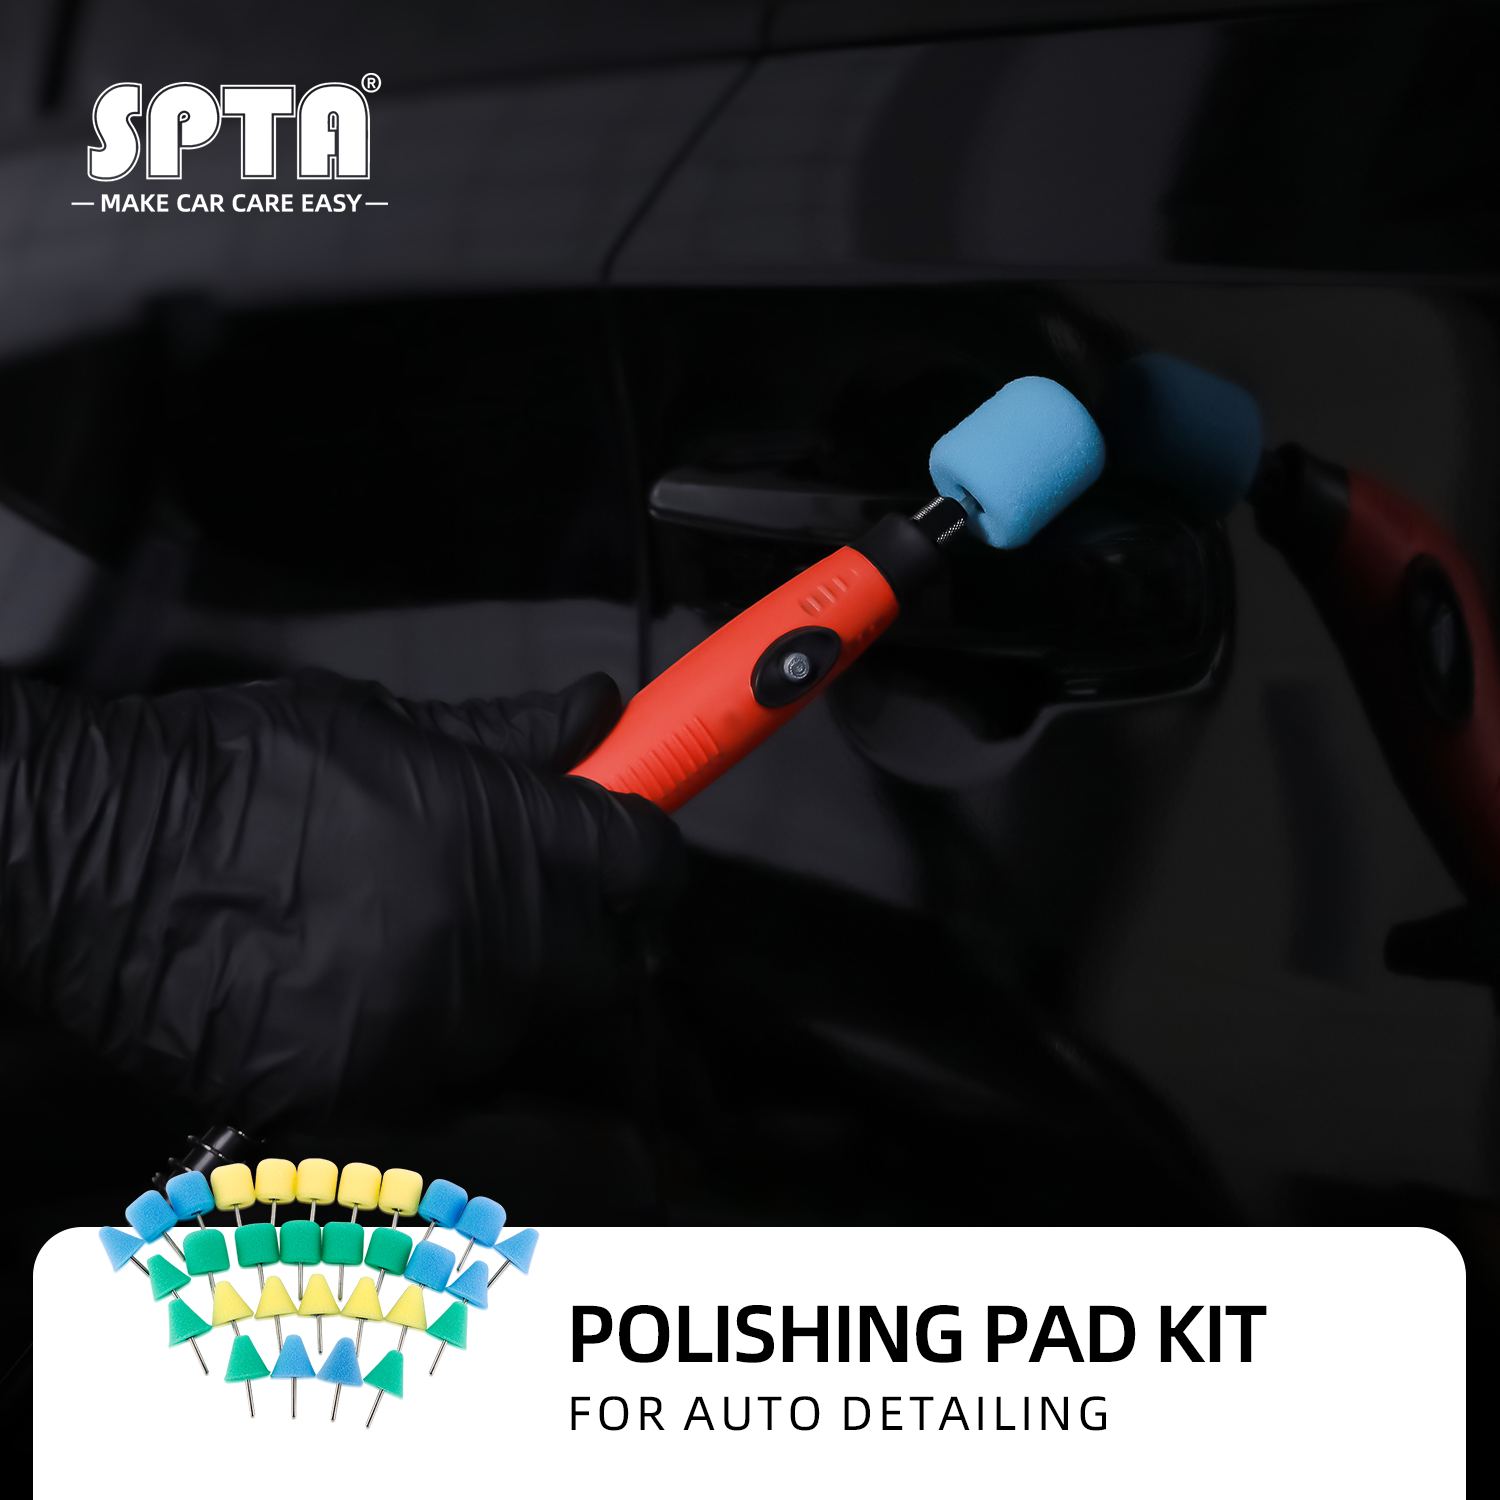 SPTA 3inch Electric Car Detail Polisher, Rotary Poliher with M14 Thread